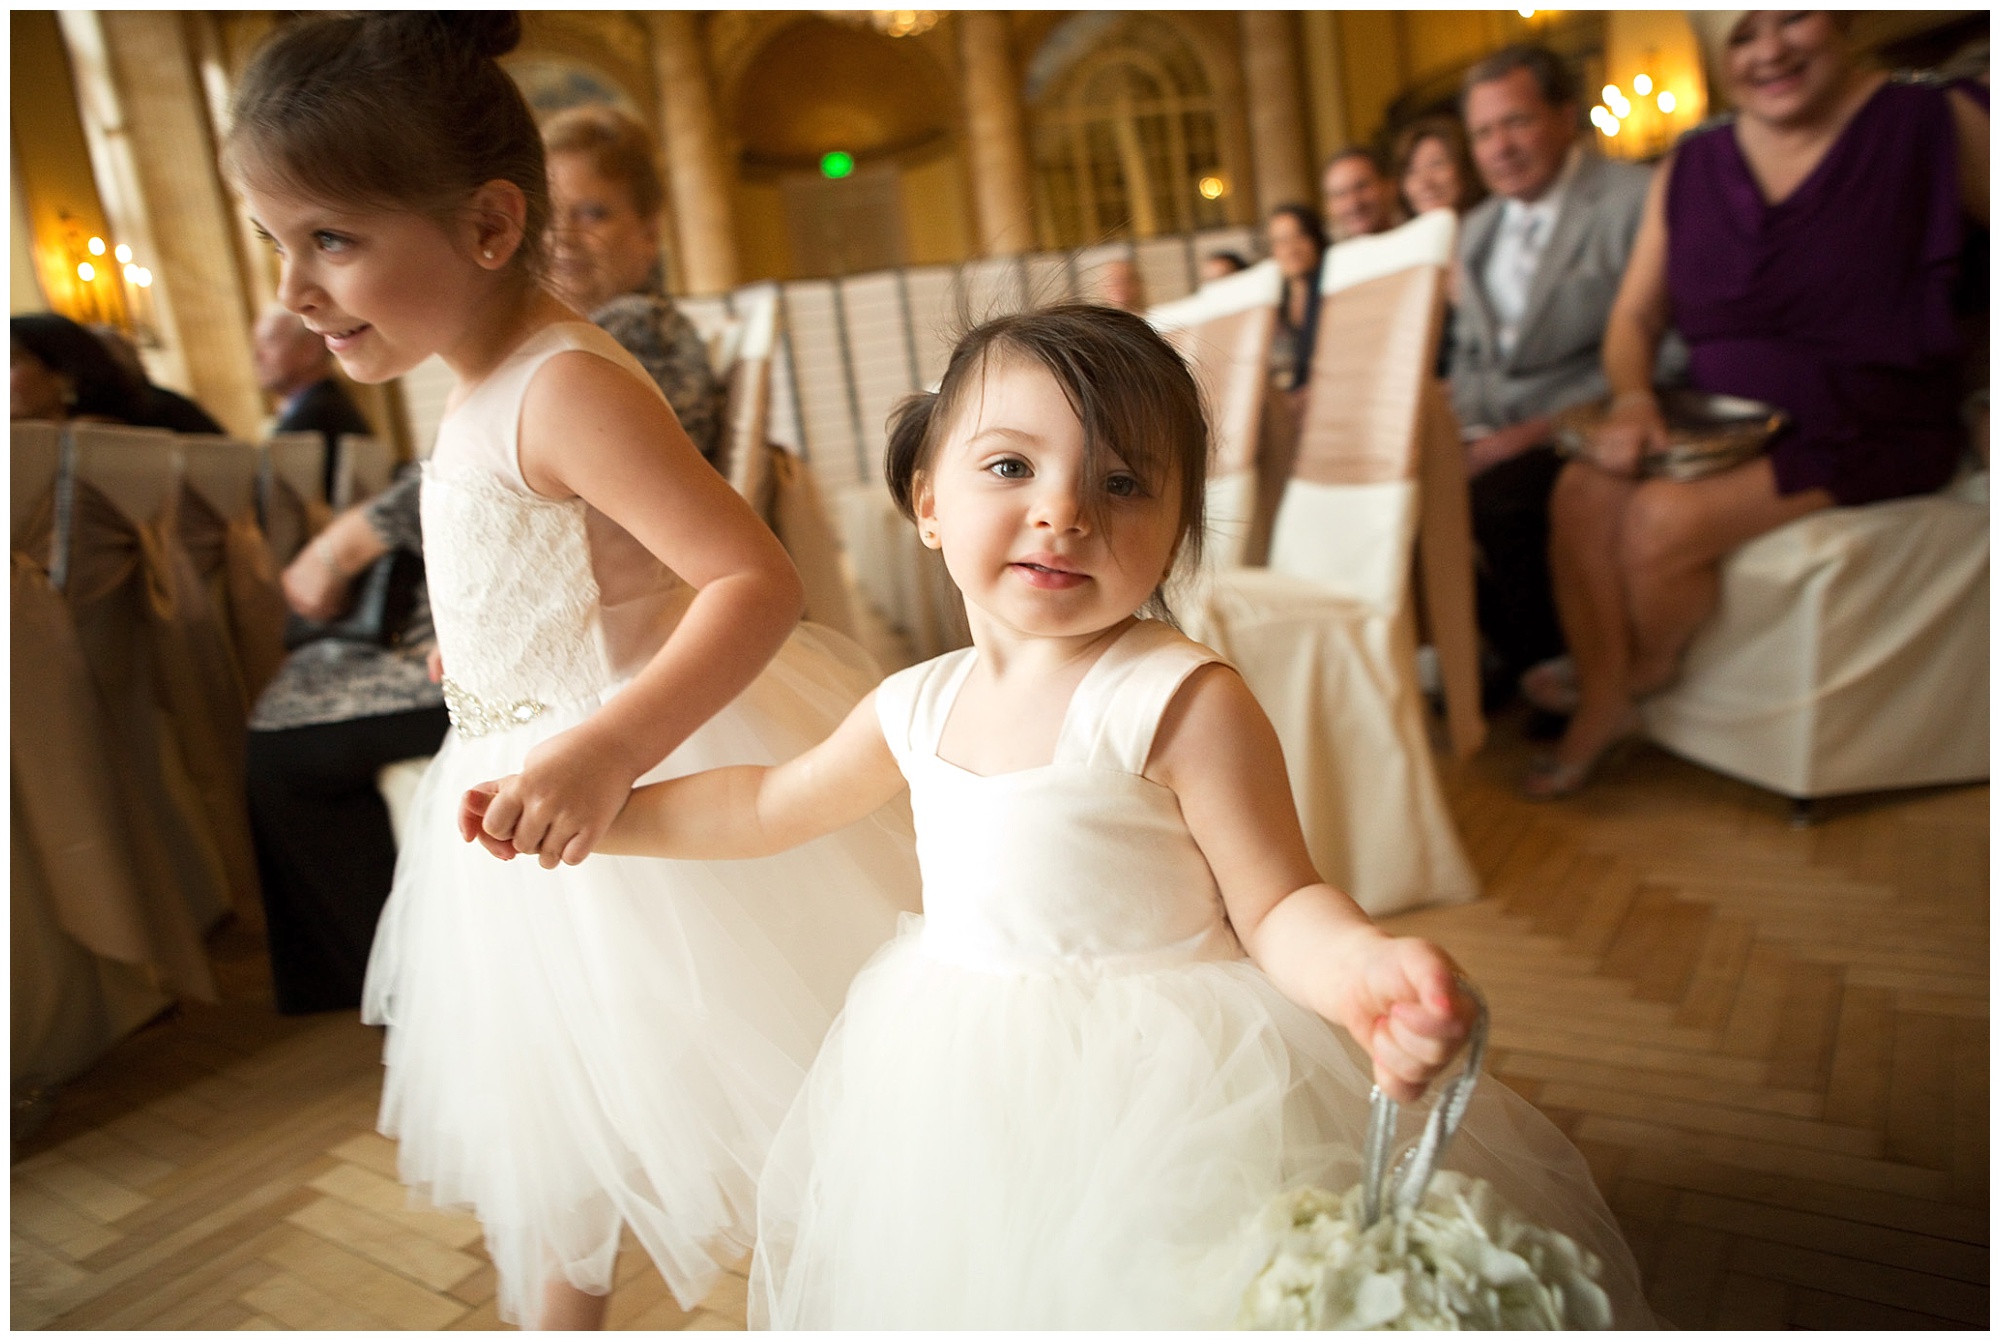 Adorable photo of a flower girl during a wedding procession.